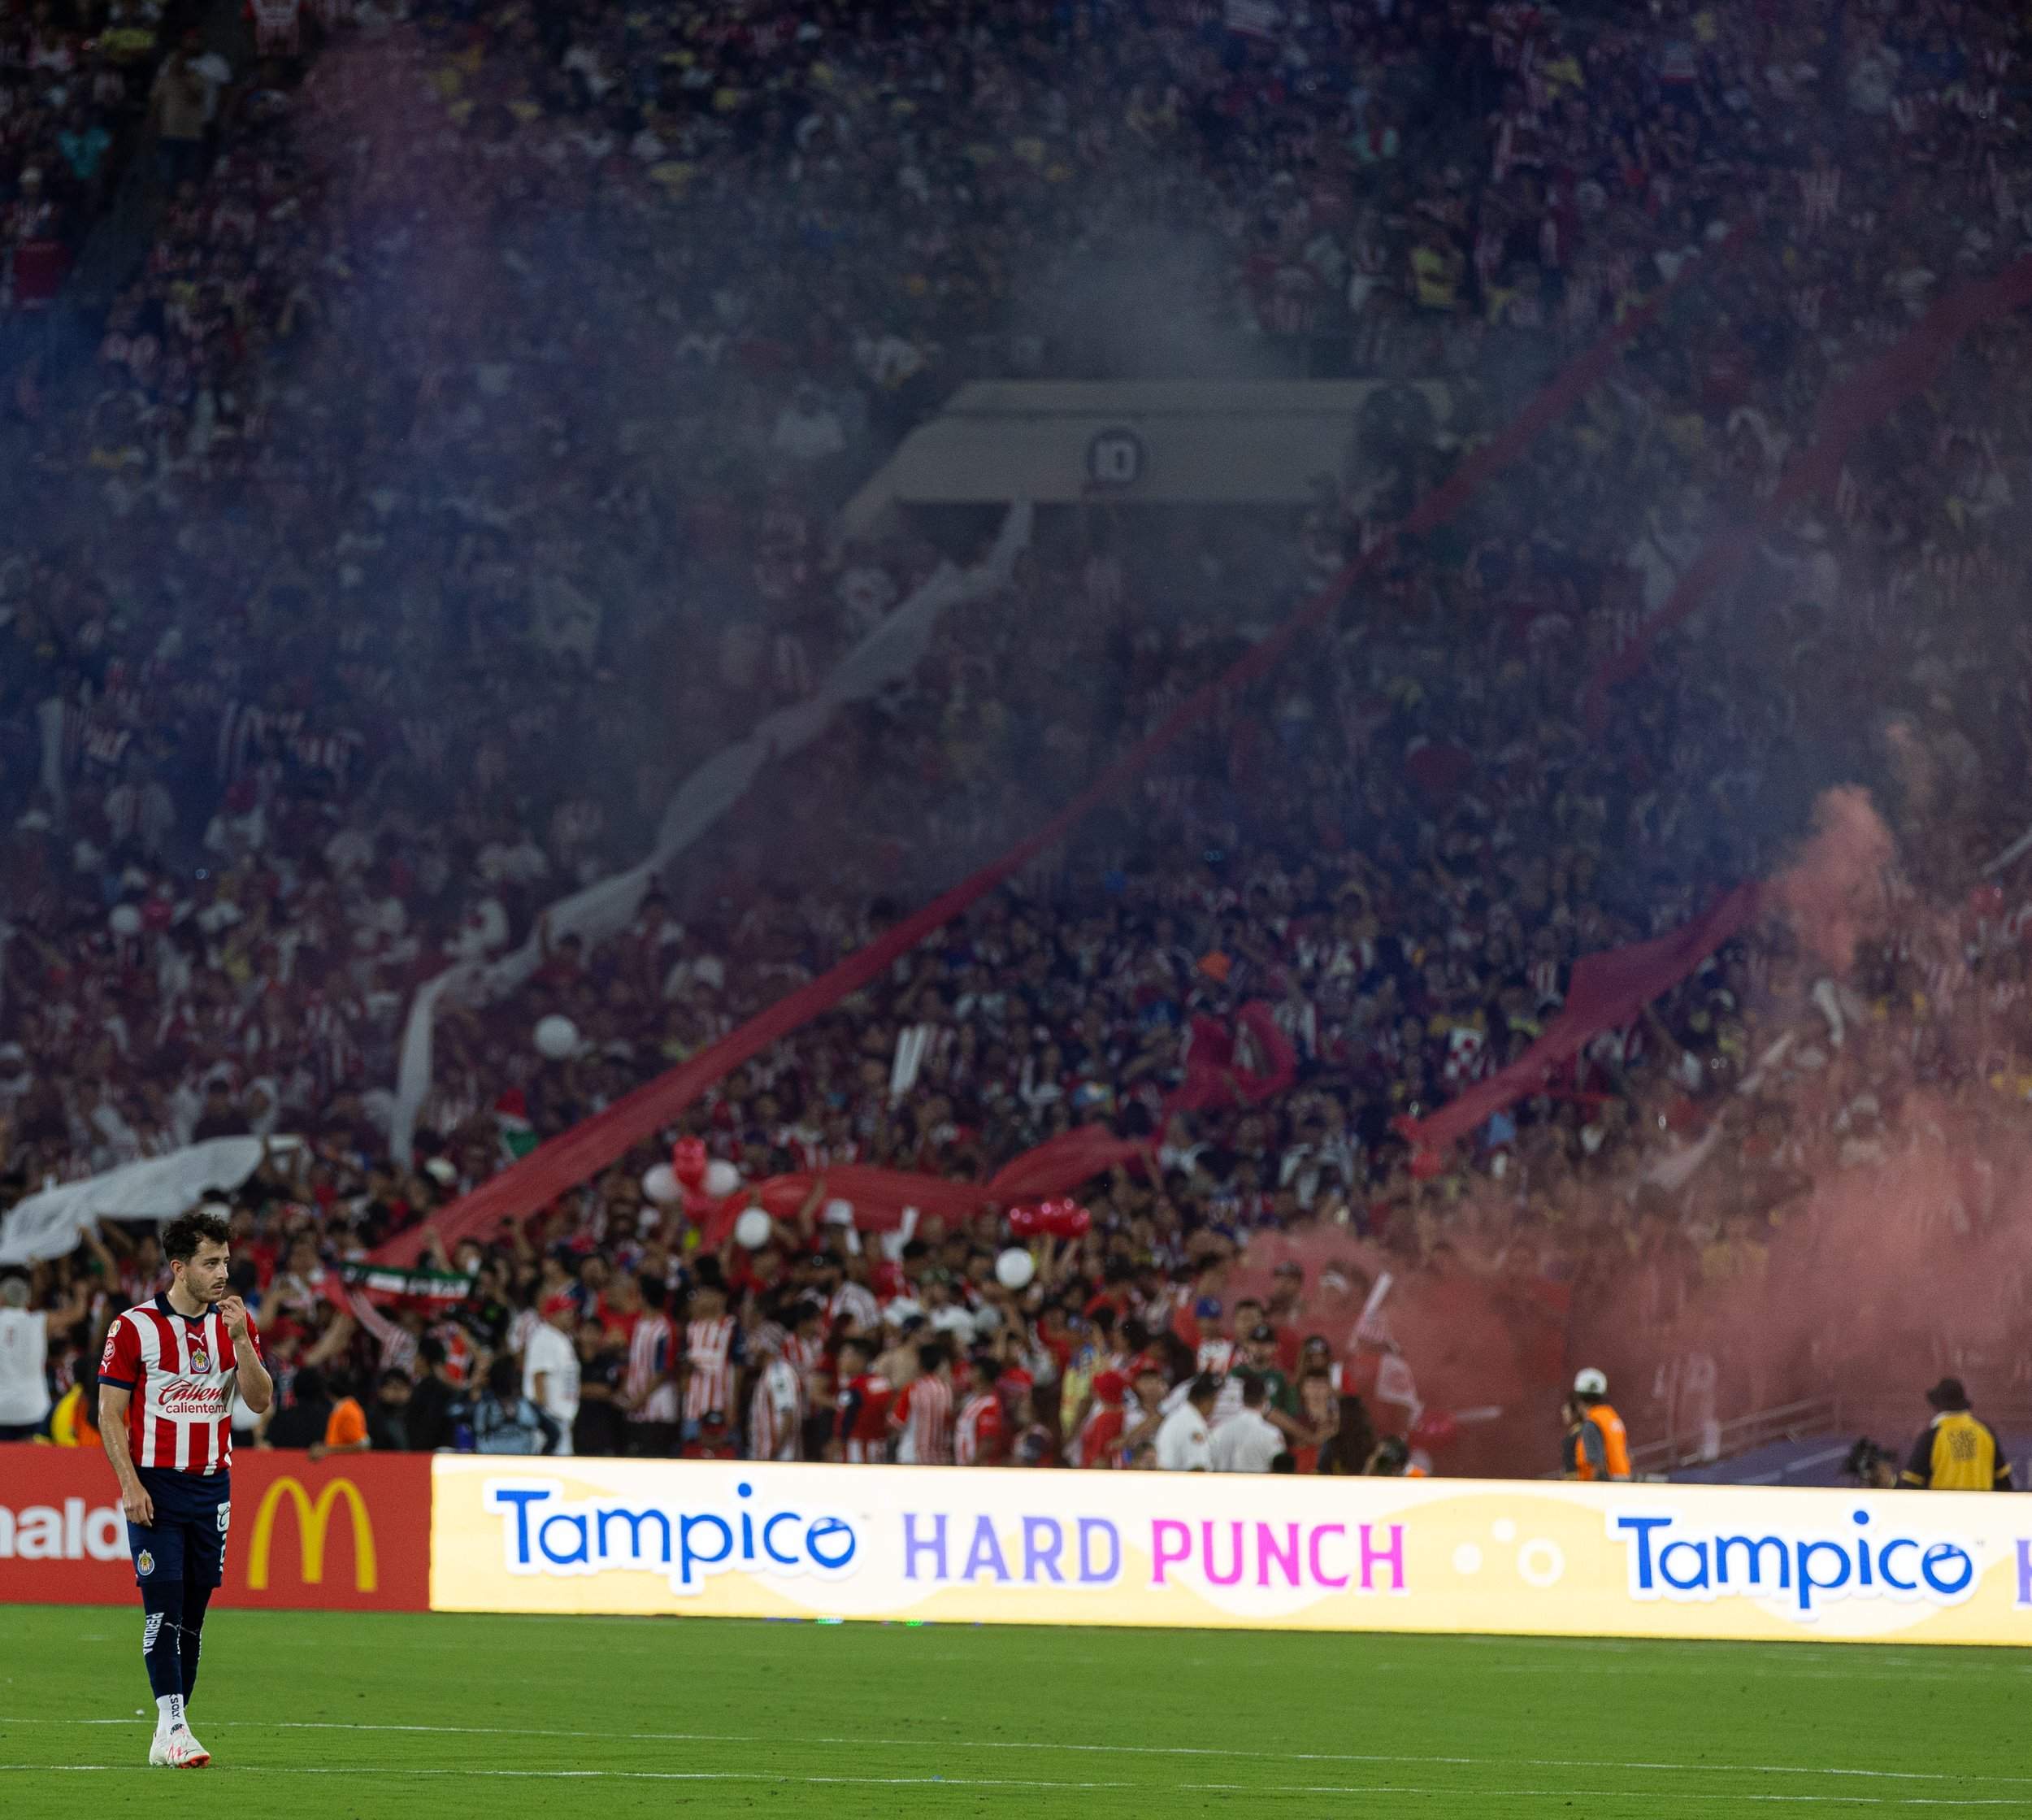  C.D. Guadalajara right-back Alan Mozo walking on the pitch as fans begin to start their smoke bombs during the match at the Rose Bowl in Pasadena, Calif. on Sunday, Oct. 15. (Danilo Perez | The Corsair) 